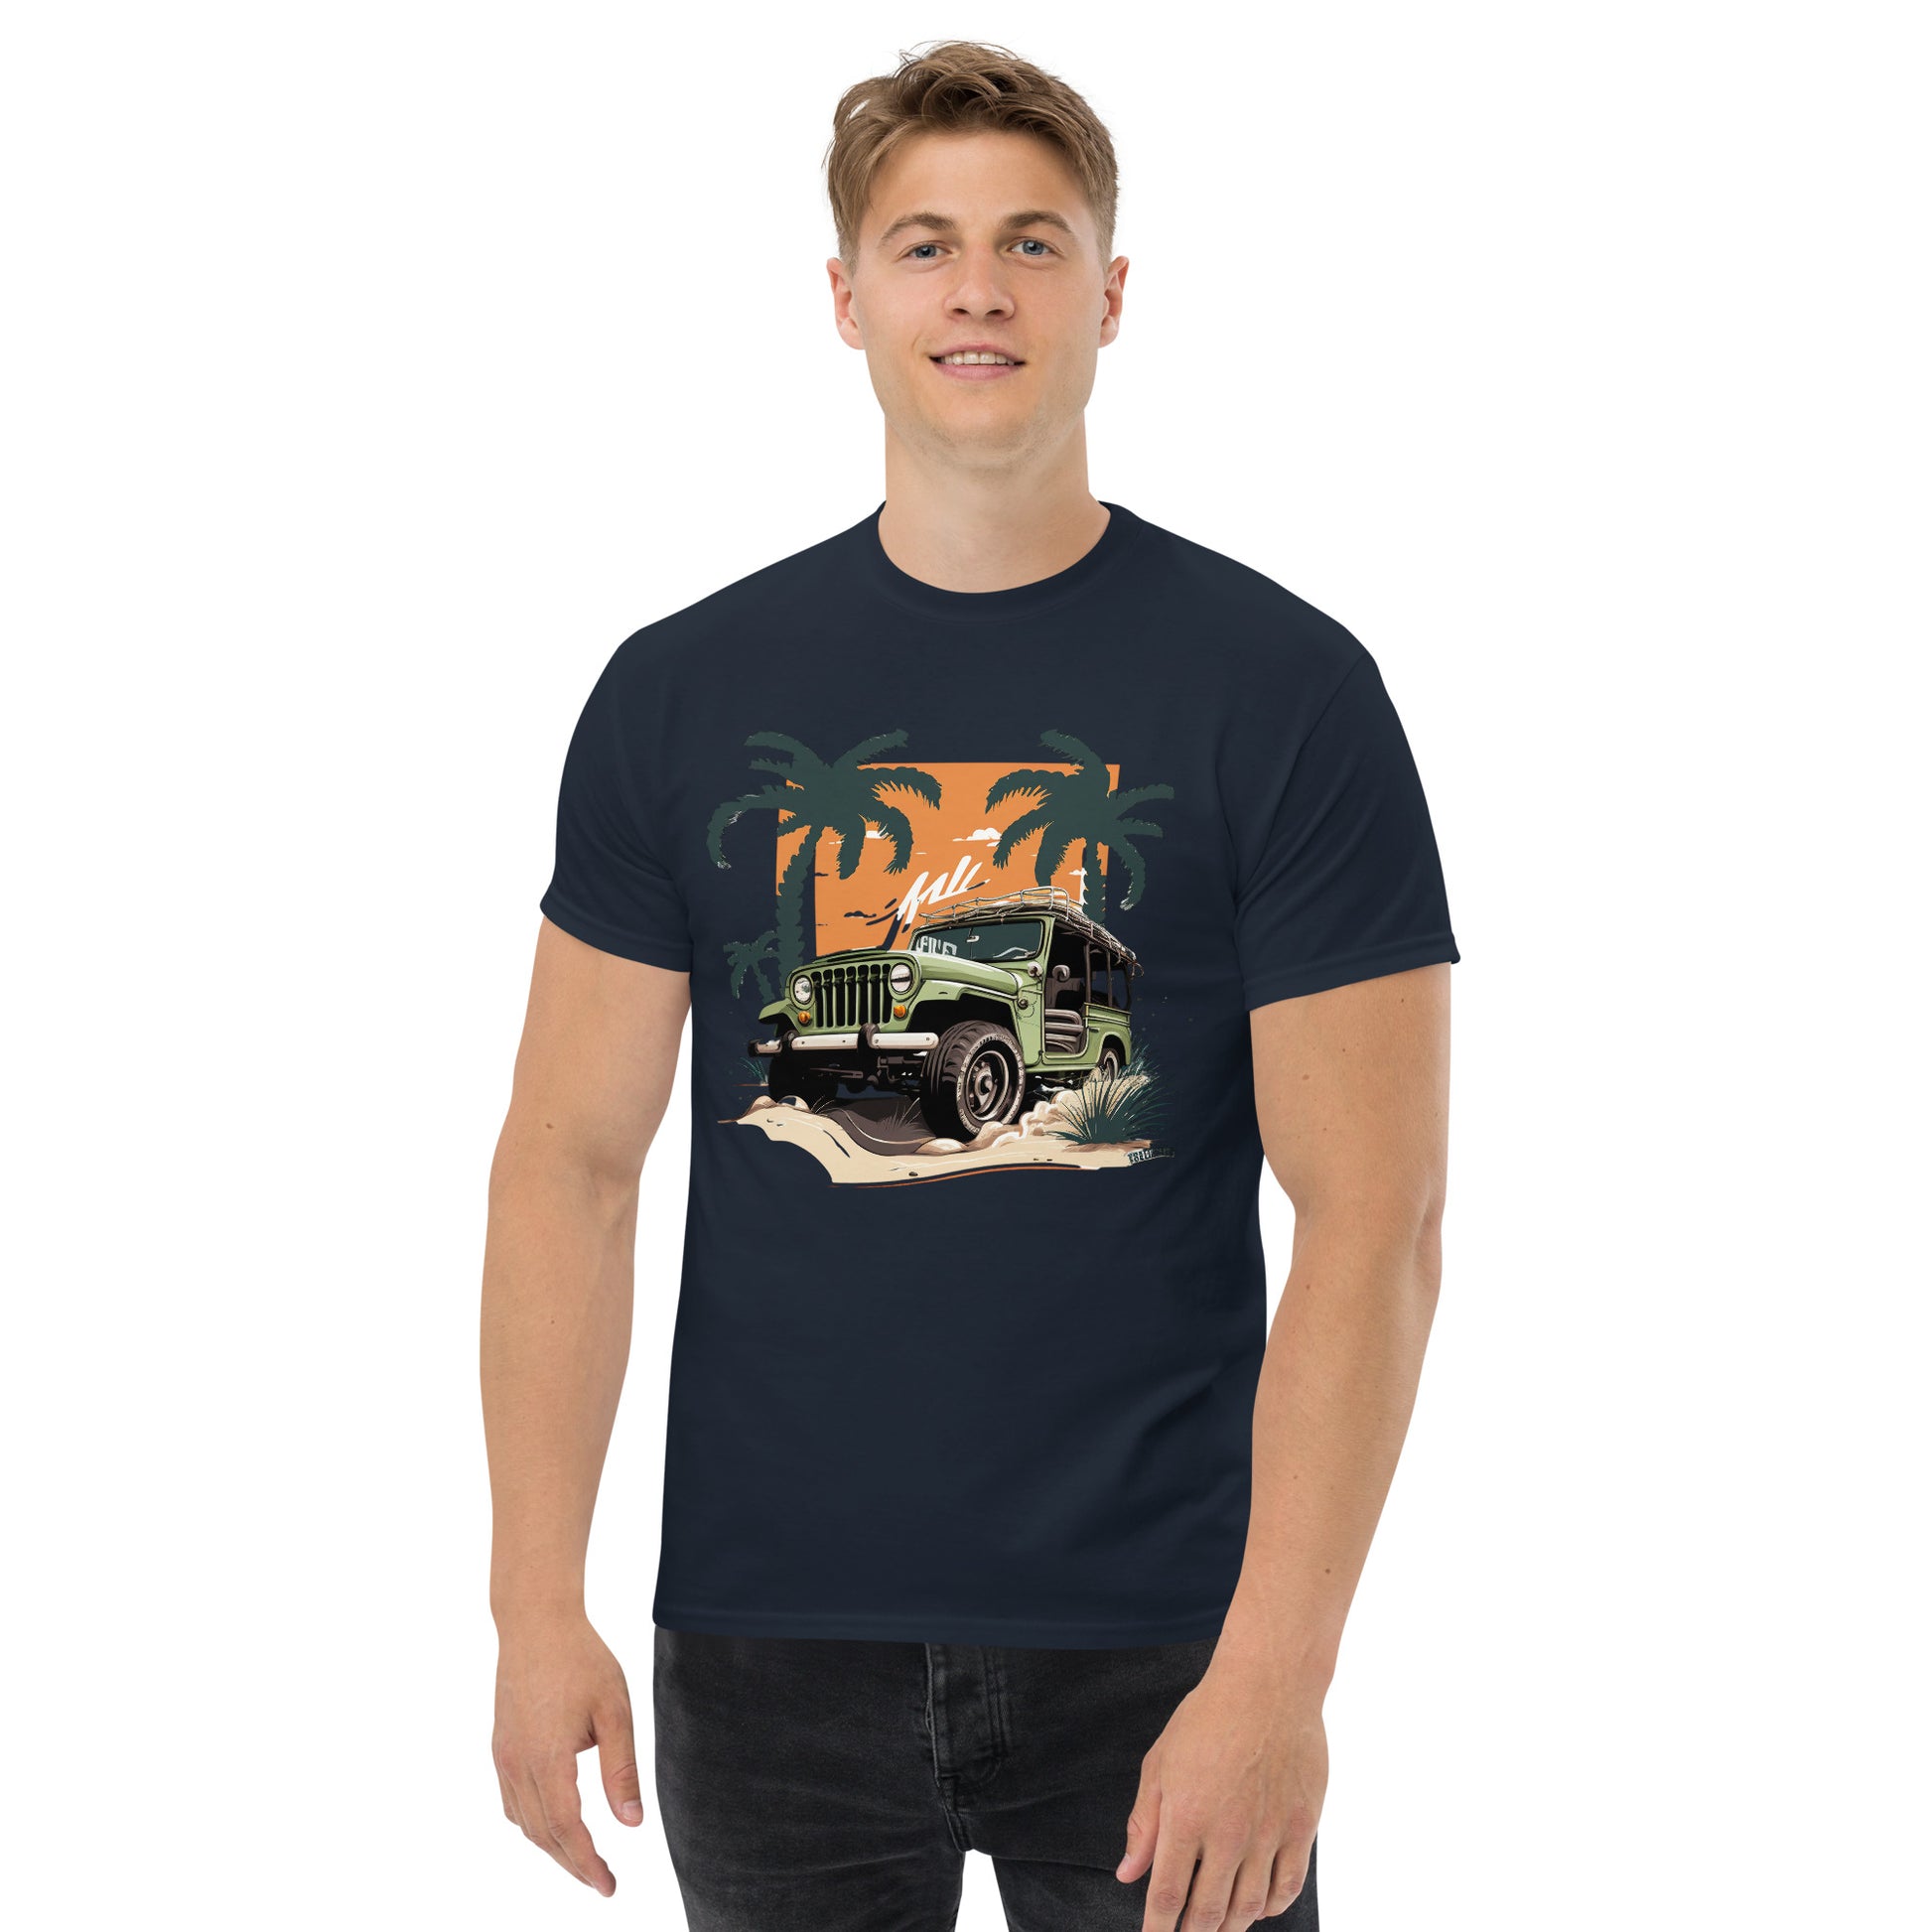 man with navy blue t-shirt with picture of jeep in front of palm trees 